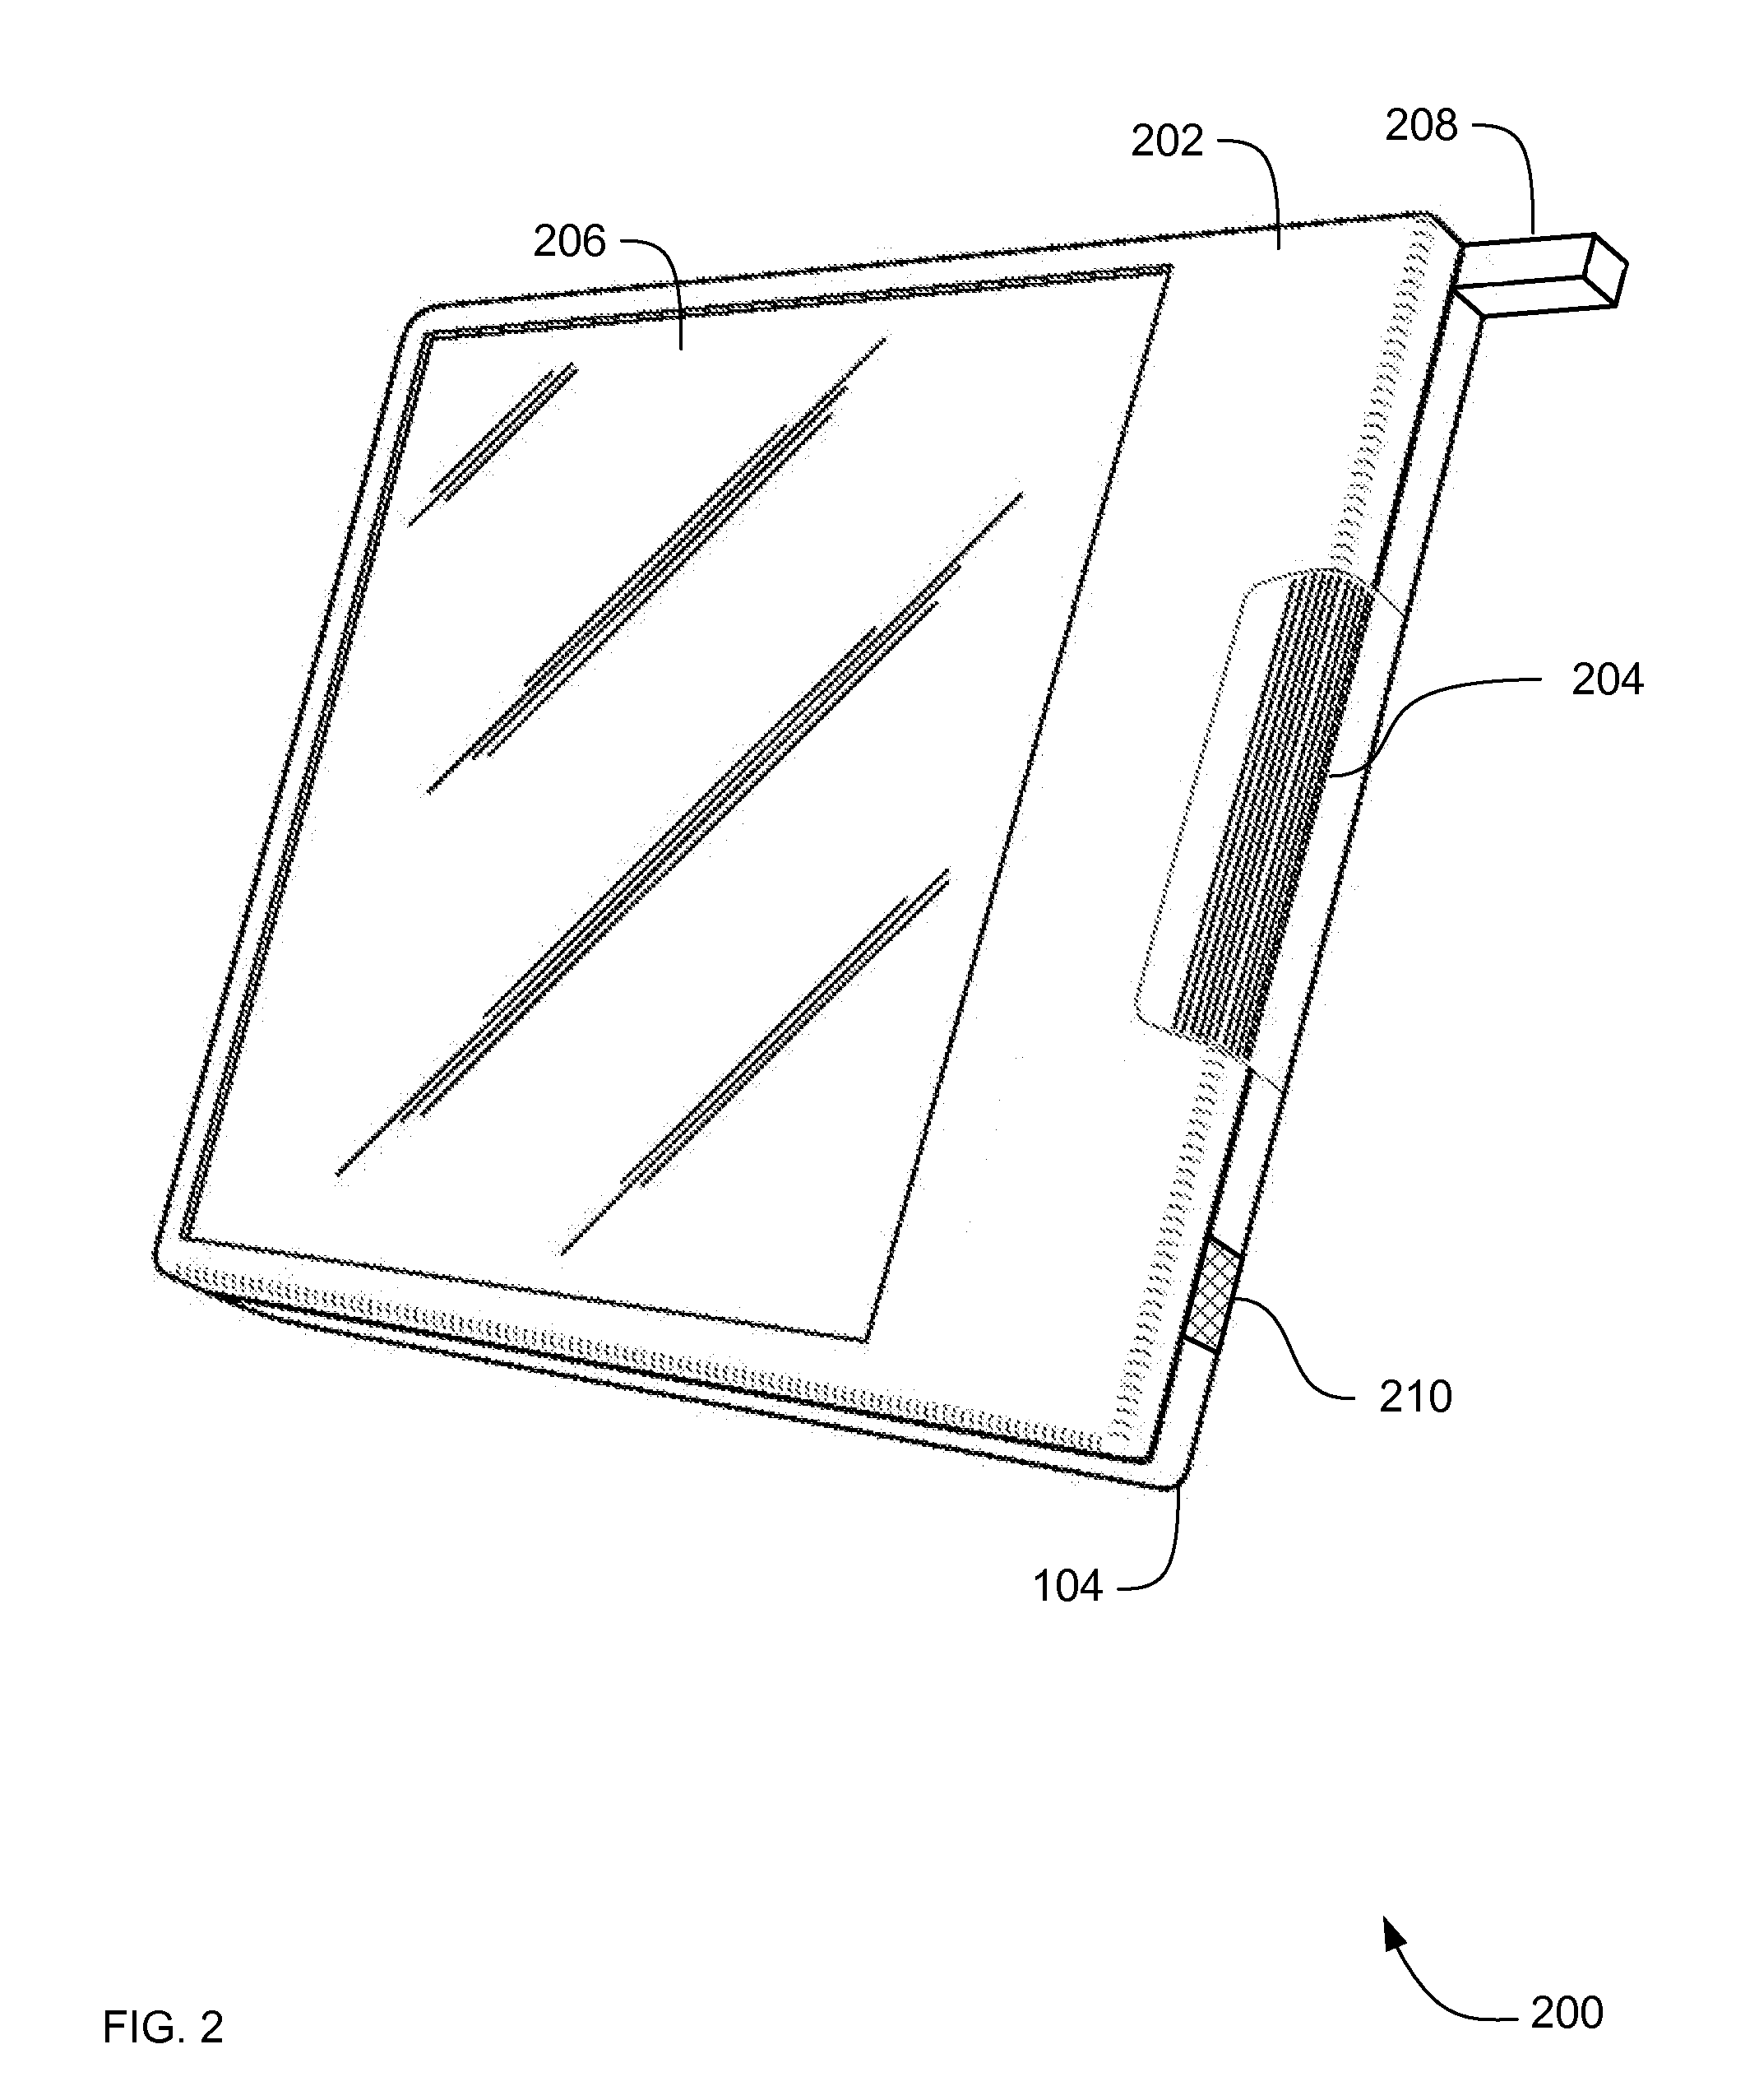 Systems, methods and apparatus for auxiliary ethernet port for wireless portable x-ray detector